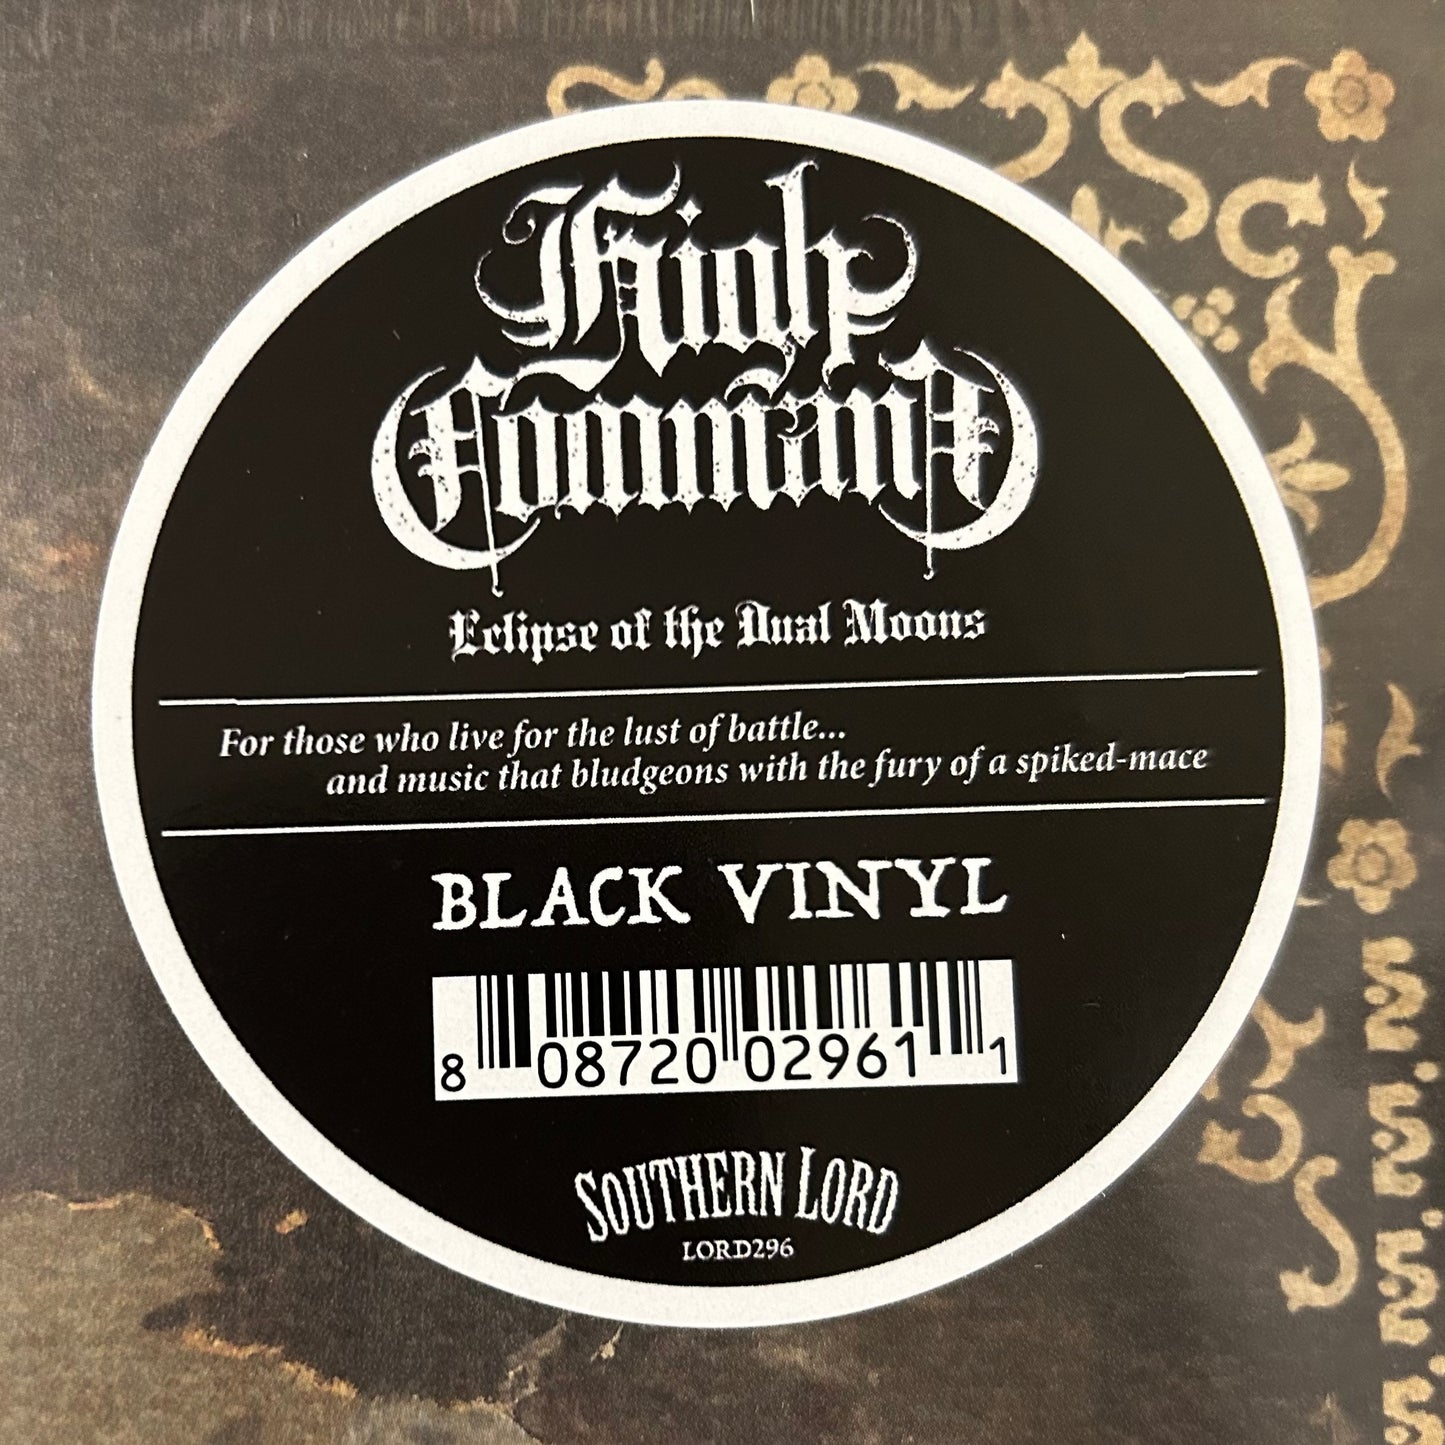 HIGH COMMAND - ECLIPSE OF THE DUAL MOONS LP